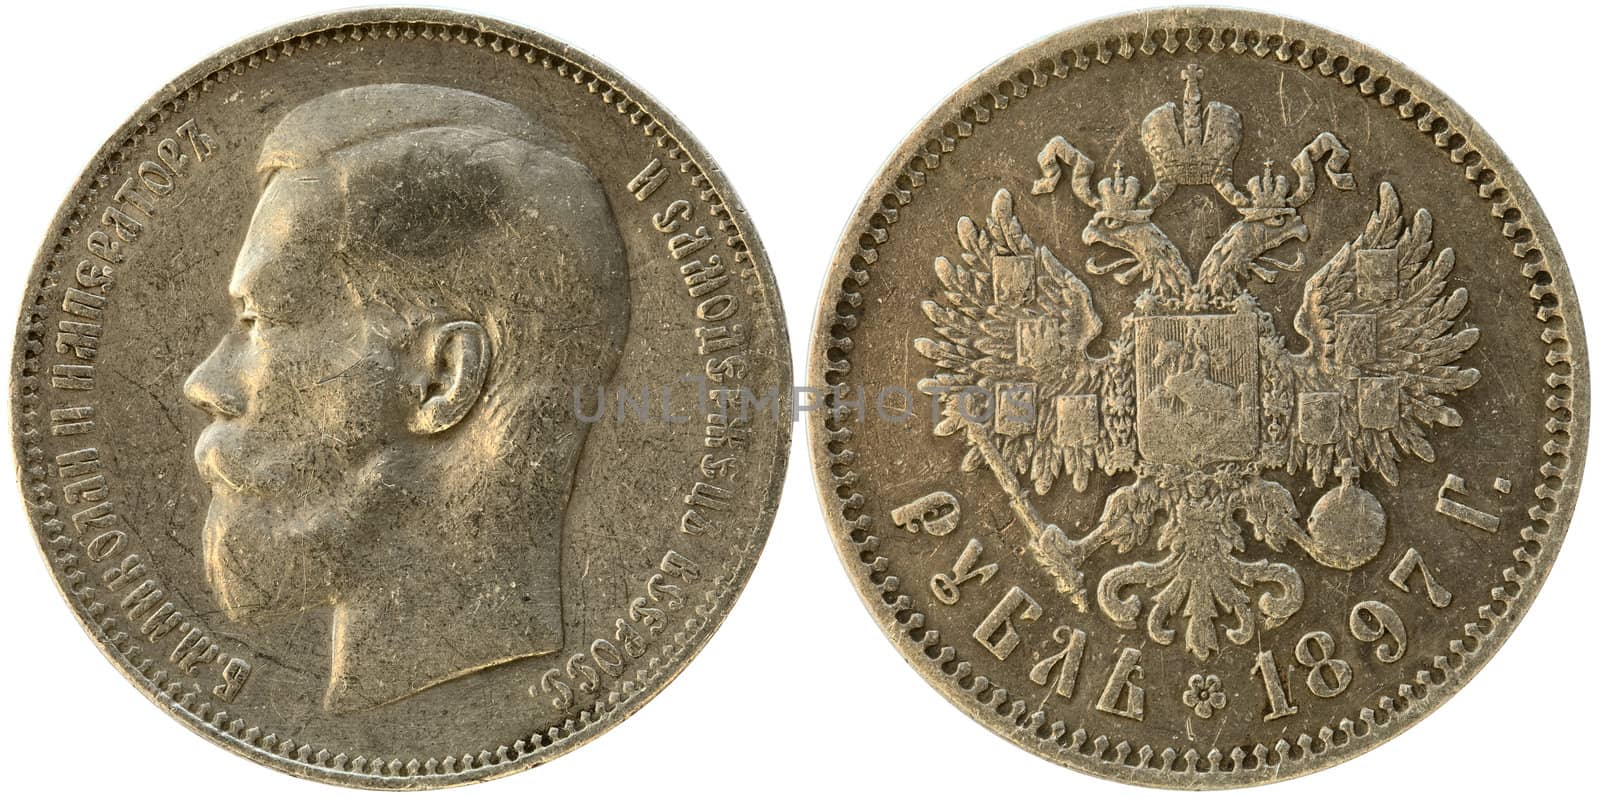 Russian coin - - ruble with Nikolai Romanov by pzaxe